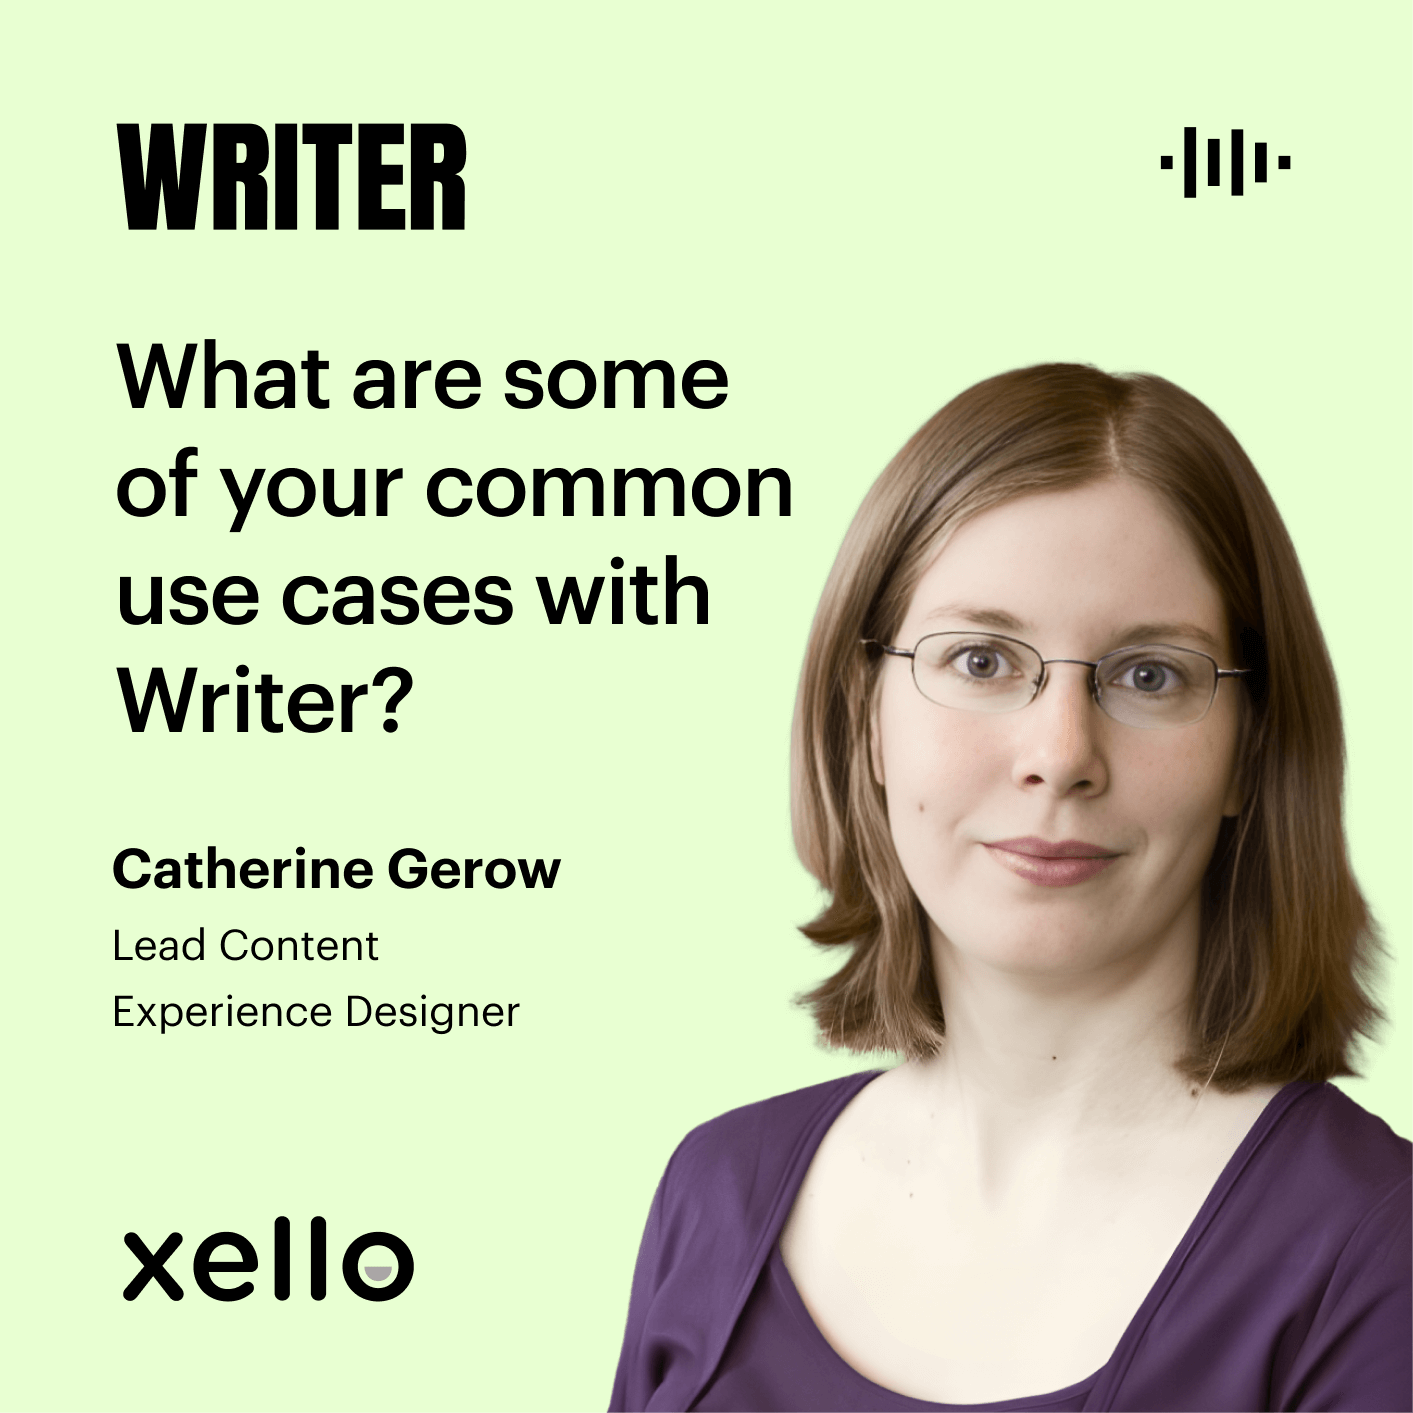 What are some of your common use cases with Writer?